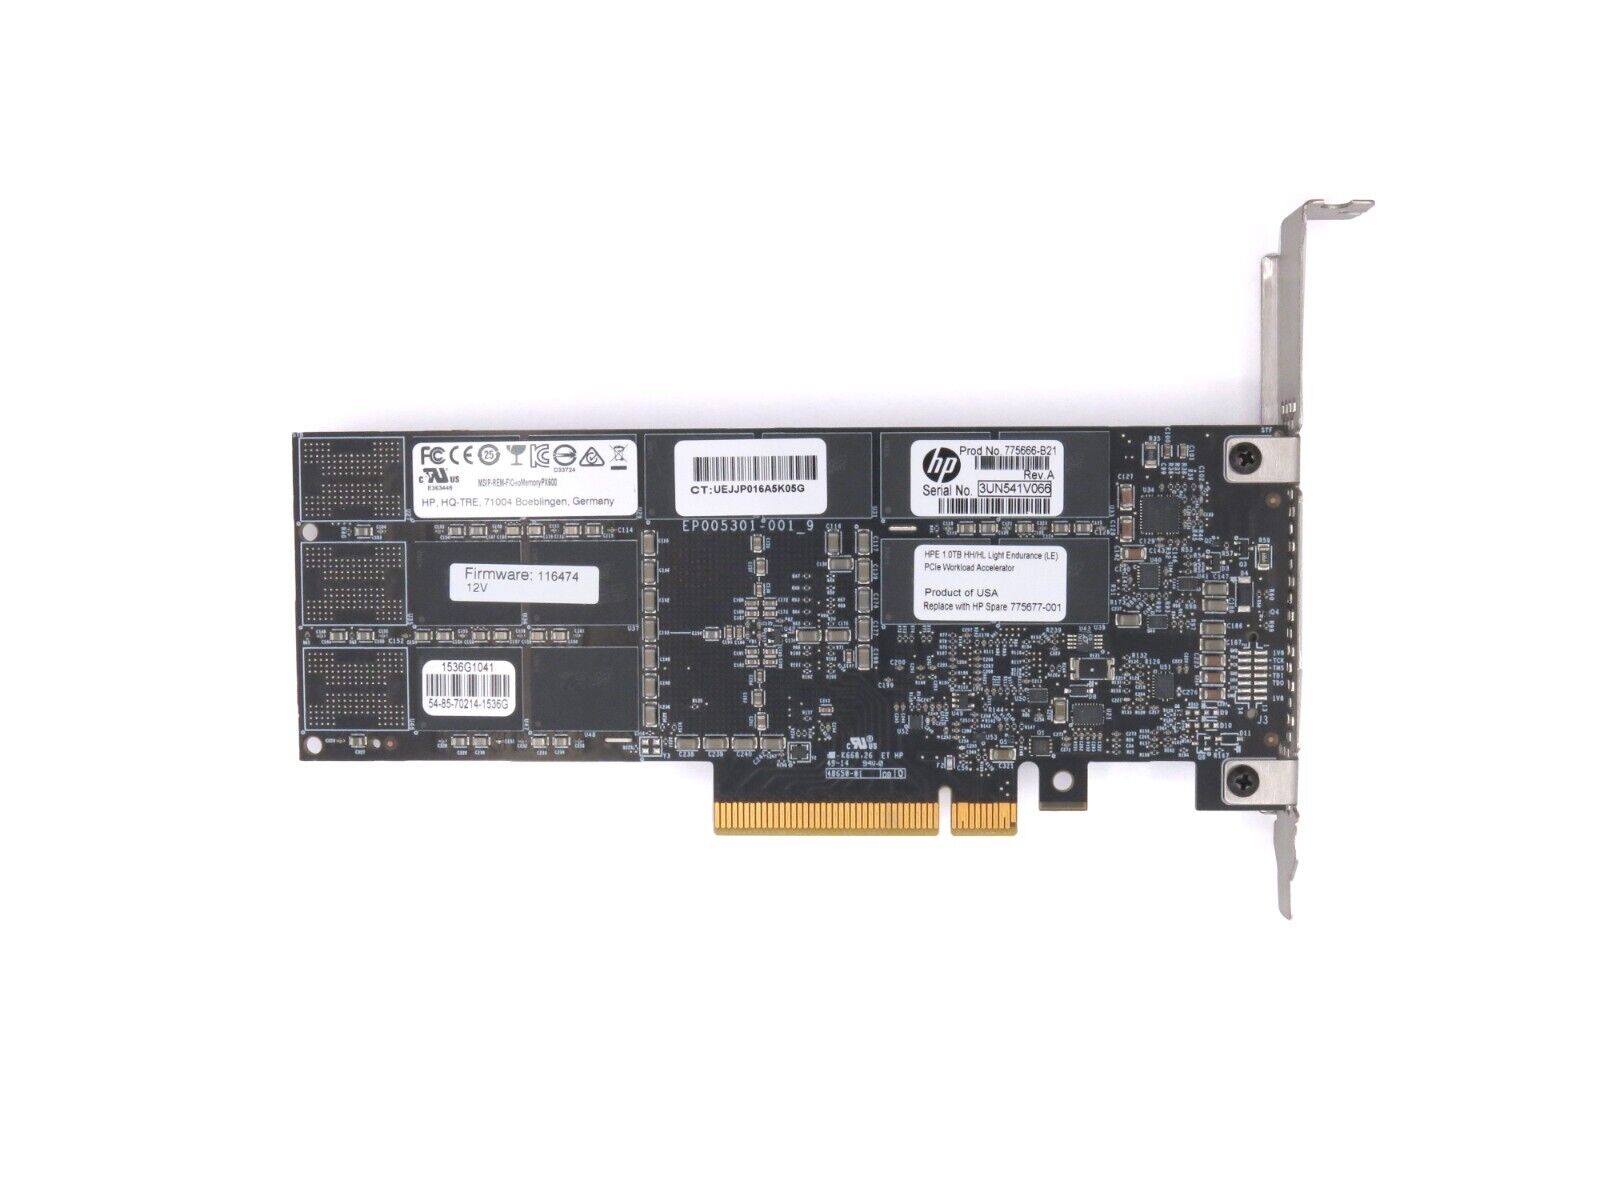 HP Sandisk ioMemory PX600 1TB HH/HL LE WI Workload Accelerator SSD PCI-e FH